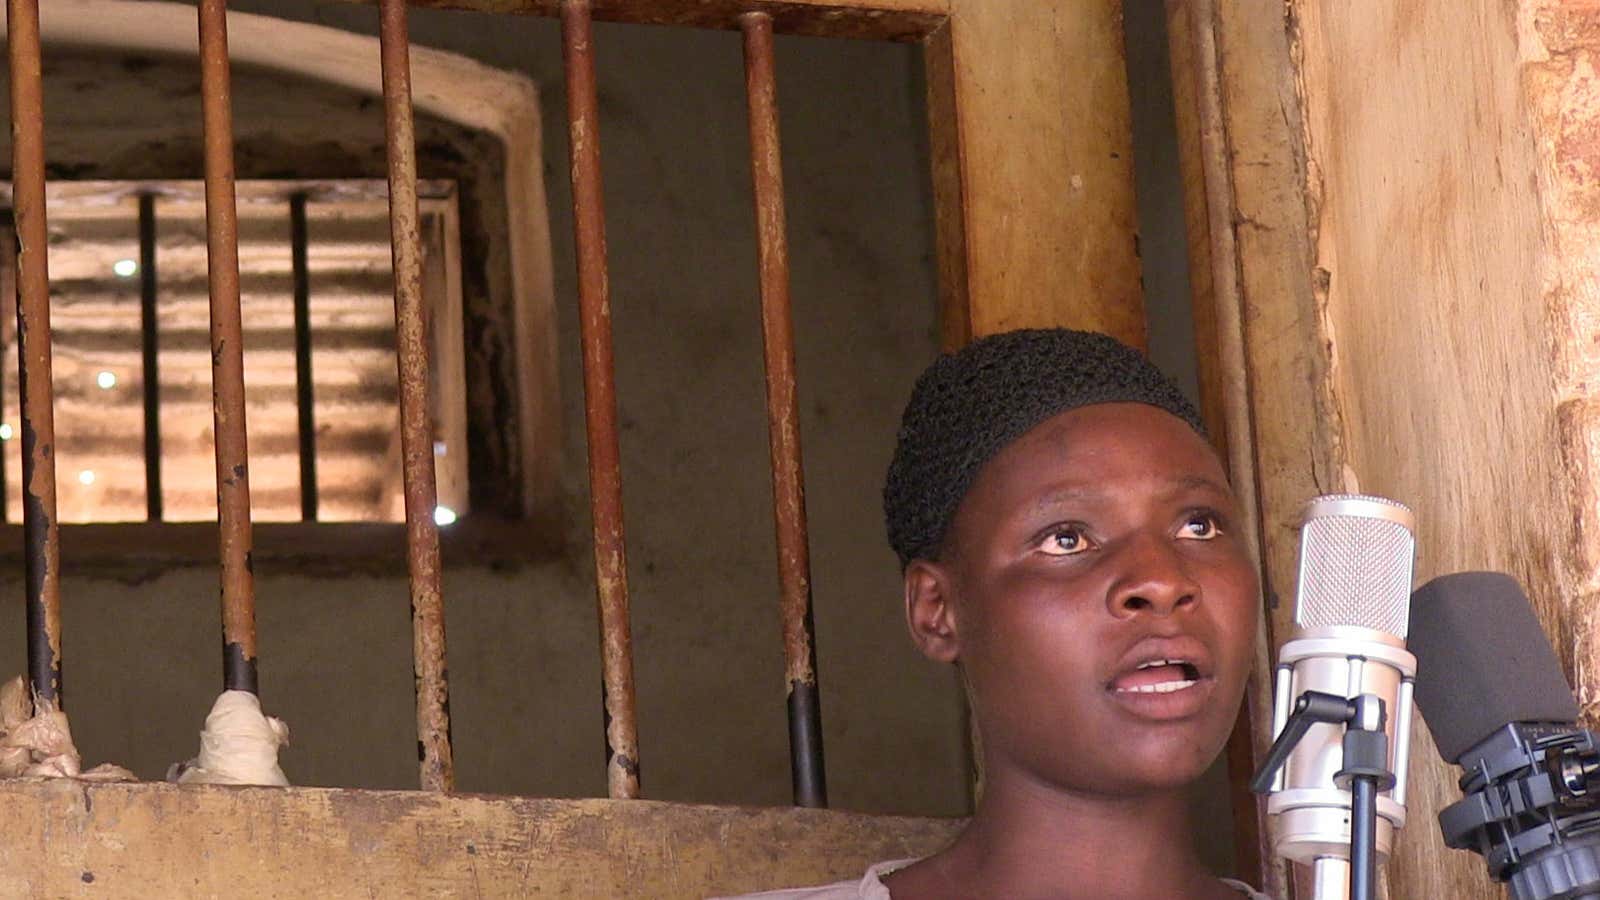 A Grammy nomination is a sign that the Malawi prisoners’ voices have been heard.